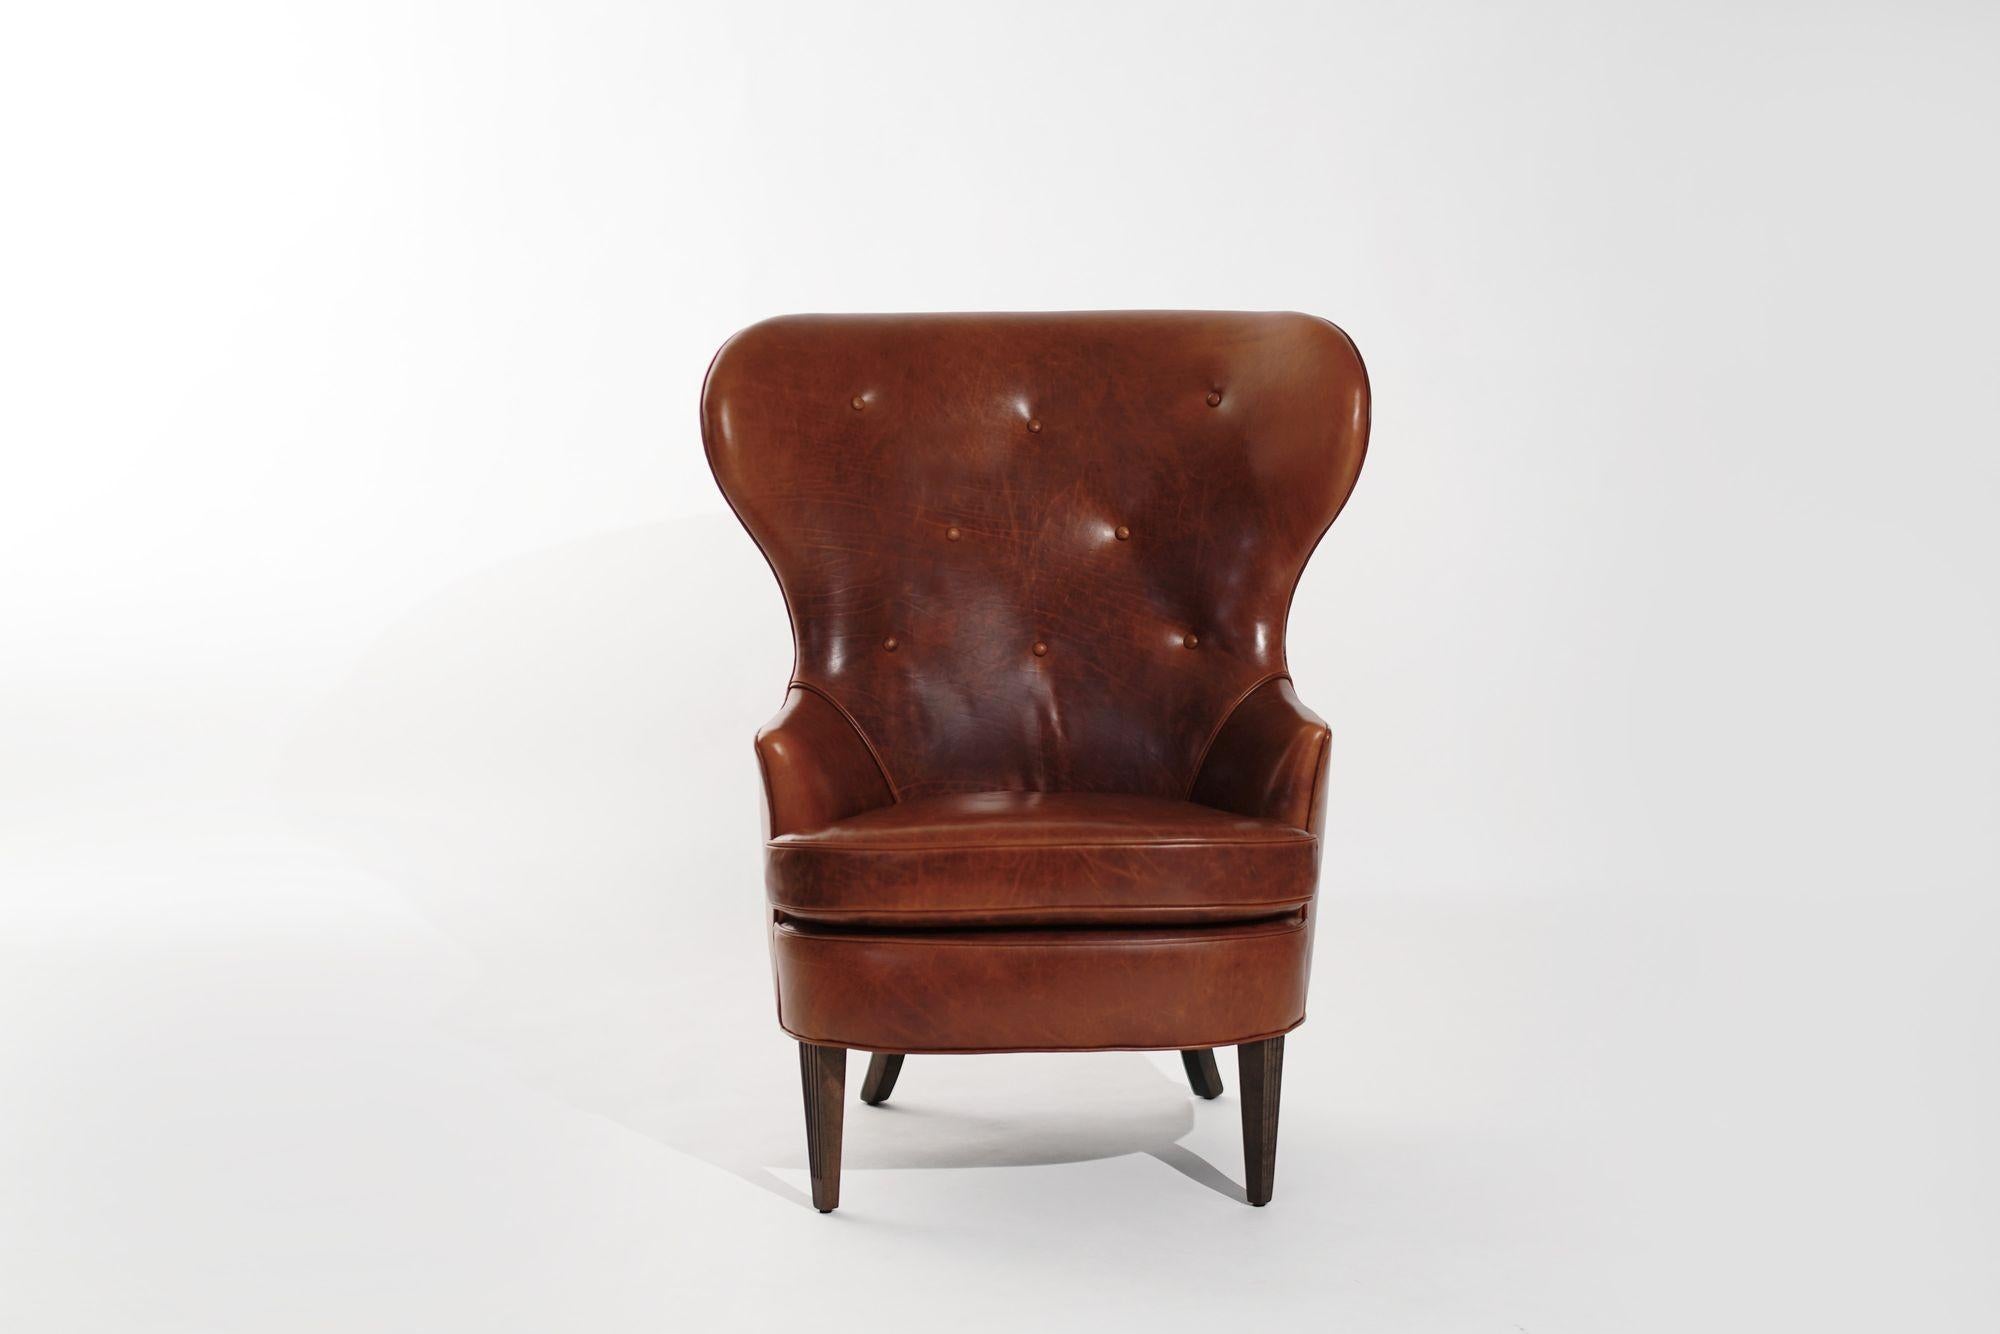 Vintage Wingback Chair in Cognac Leather, C. 1950s For Sale 1